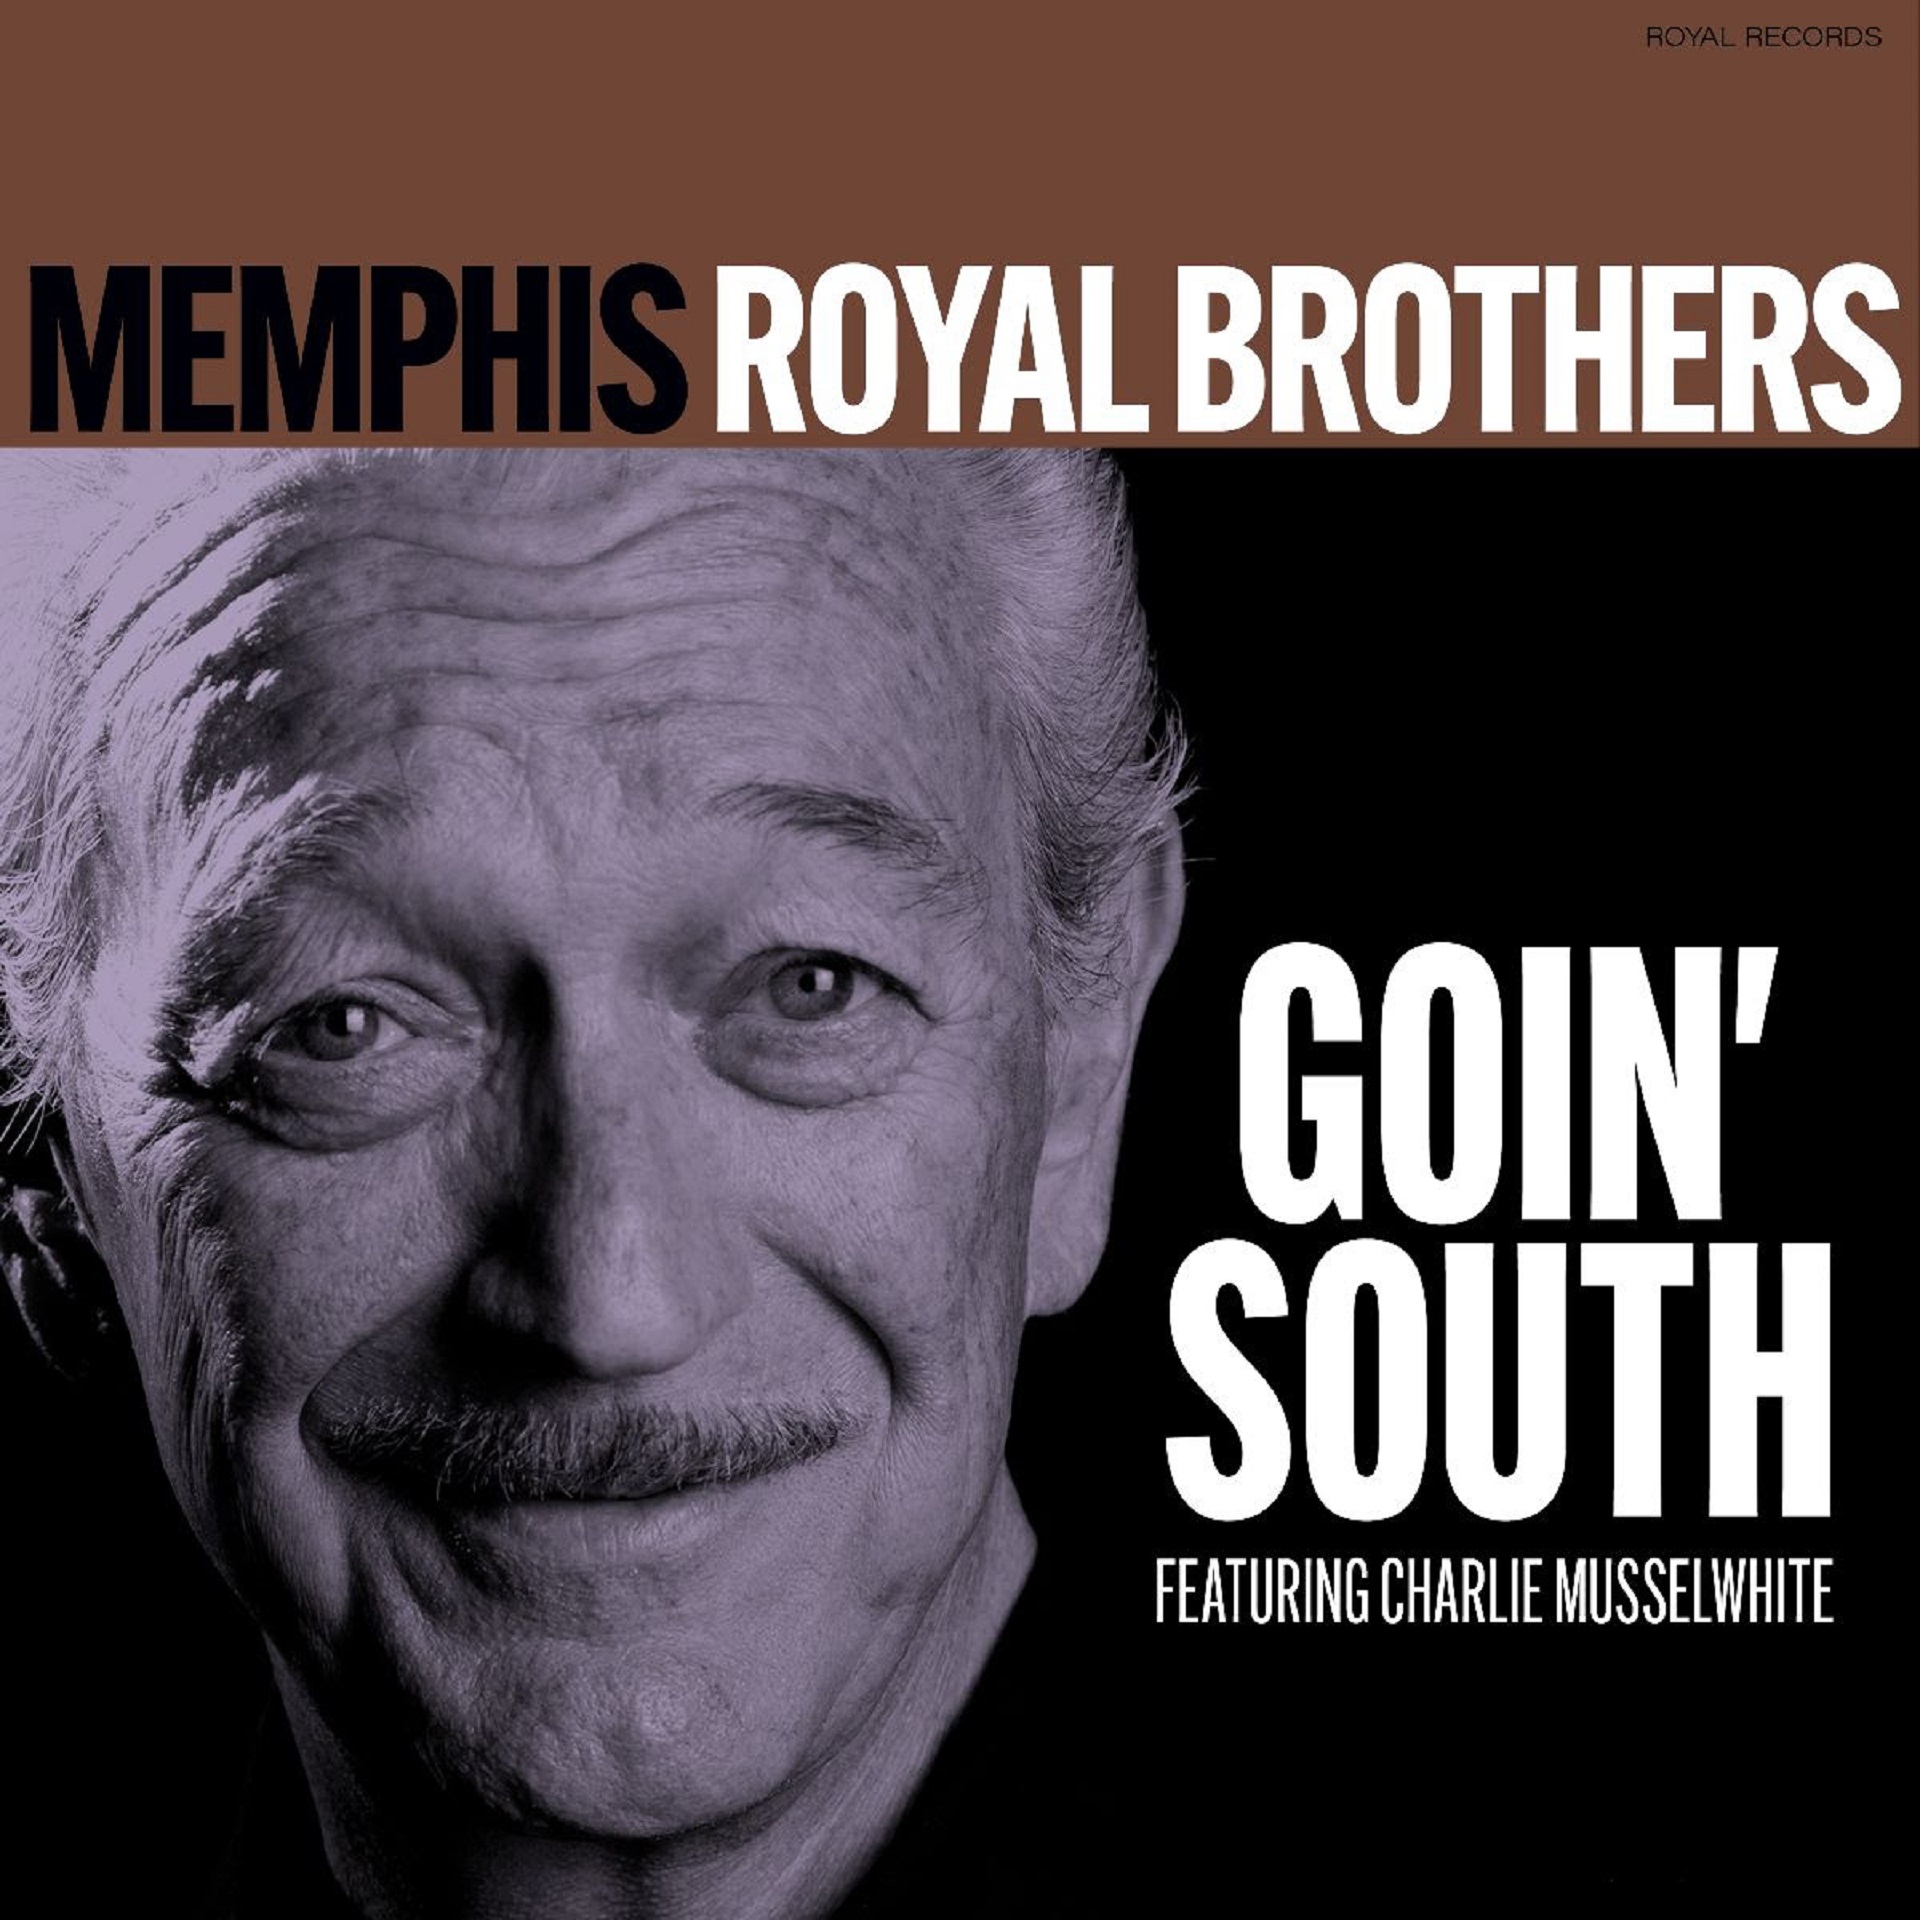 MEMPHIS ROYAL BROTHERS RELEASE "GOIN' SOUTH" FEATURING CHARLIE MUSSELWHITE